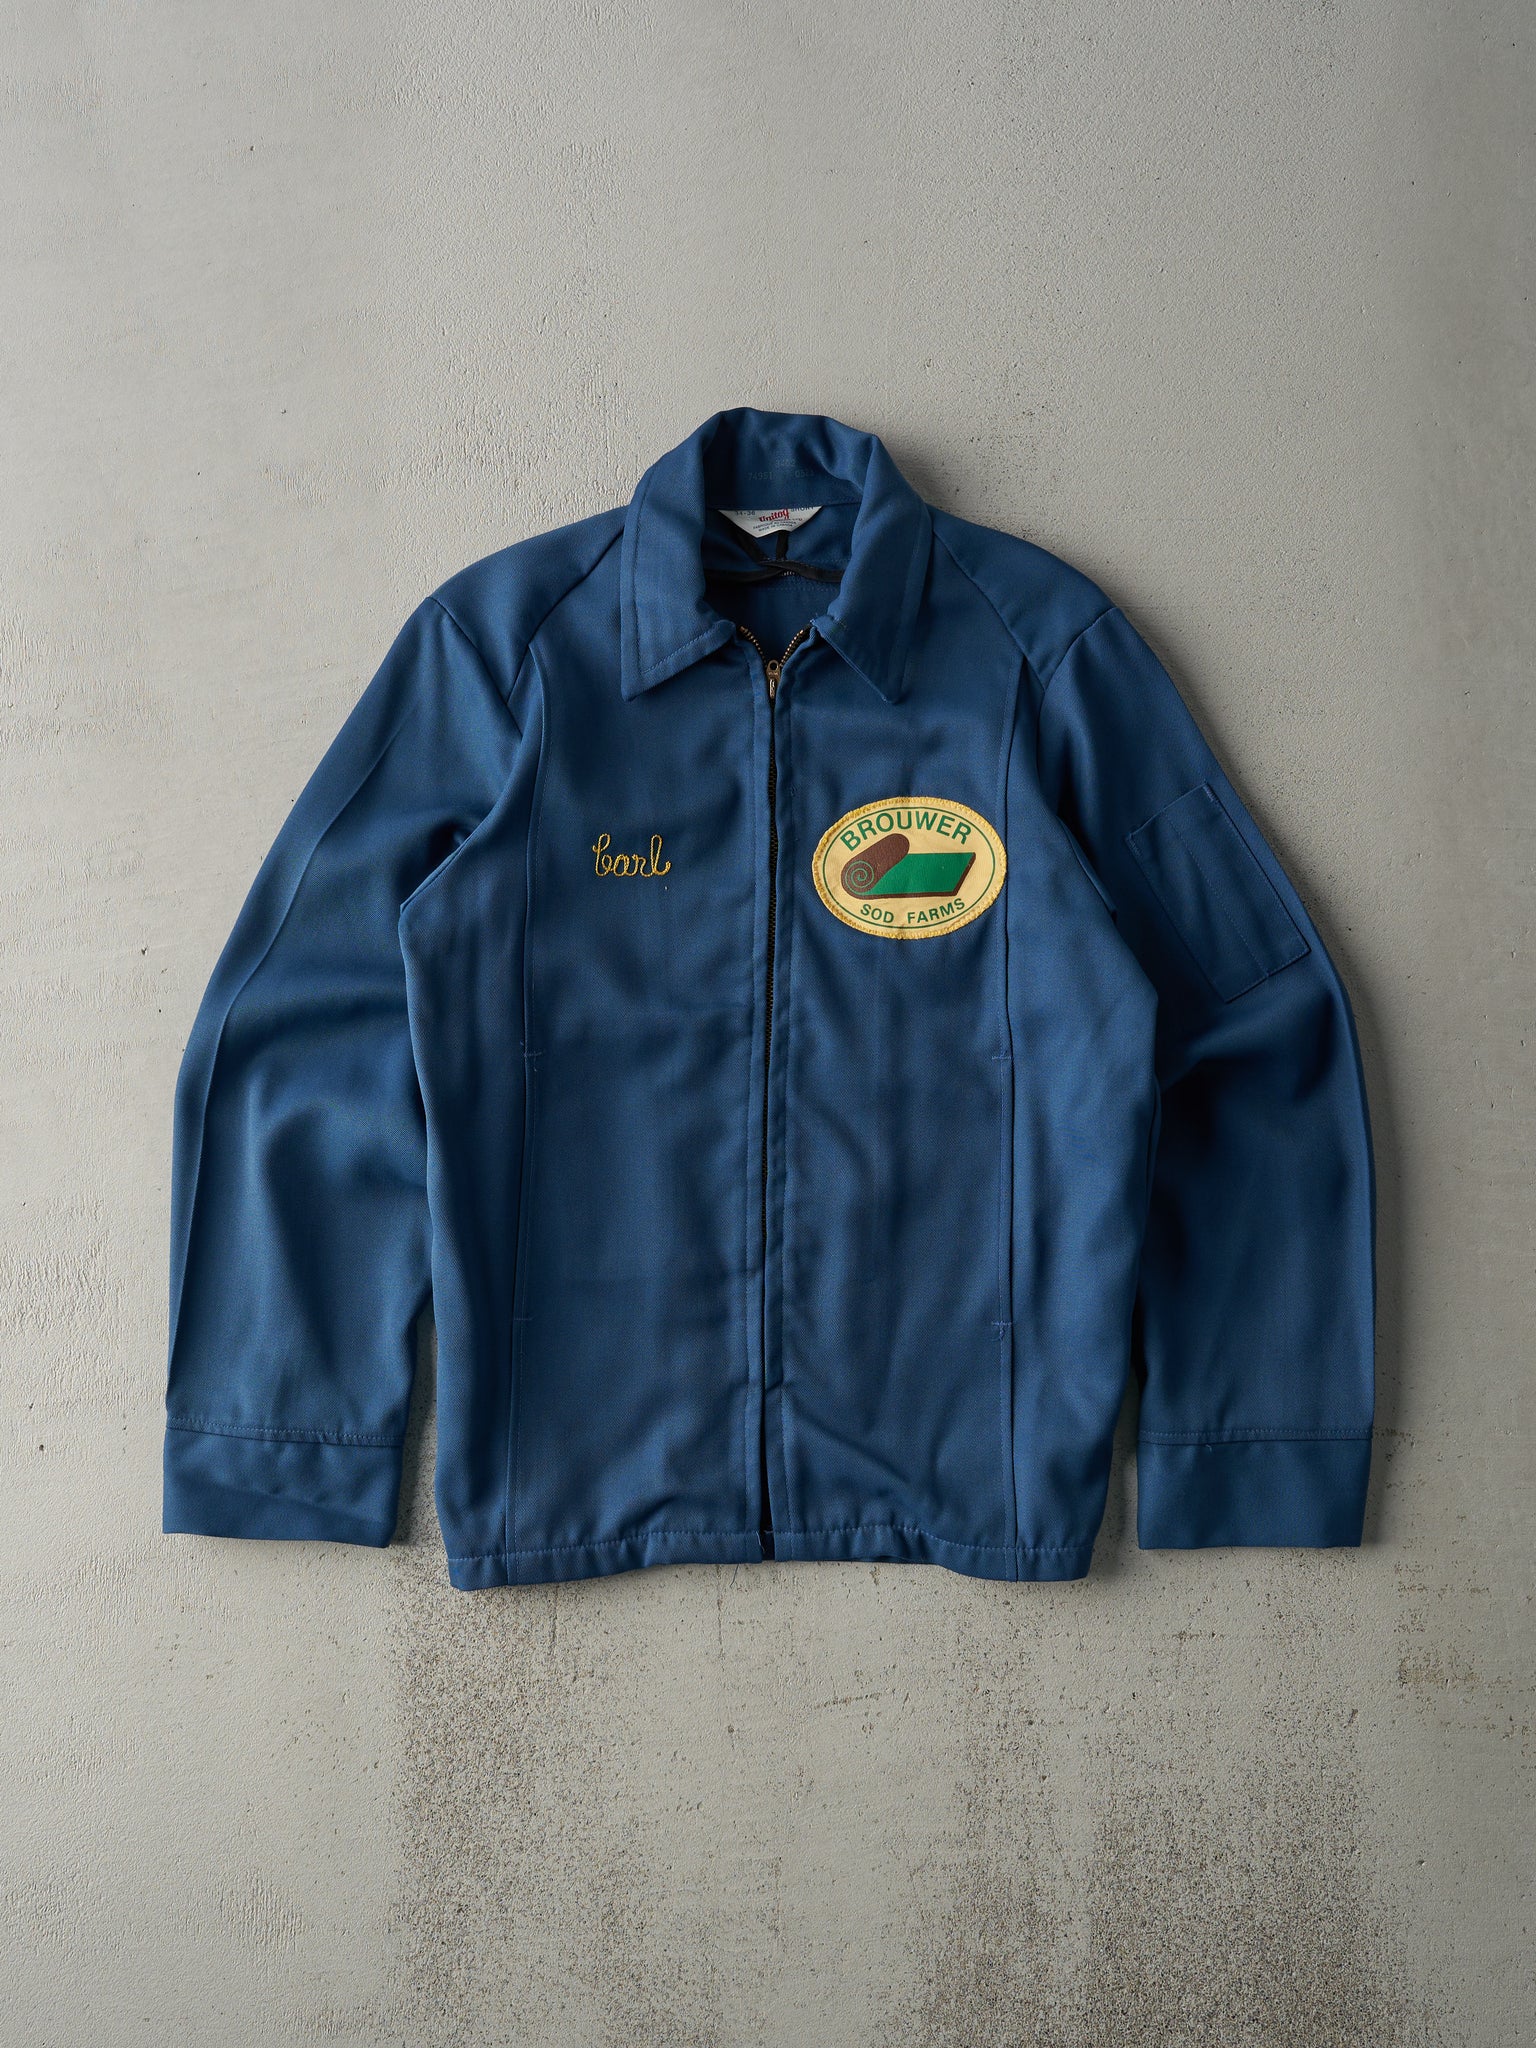 Vintage 70s Blue Brouwer Sod Farms Chain Stitched Workwear Jacket (S)